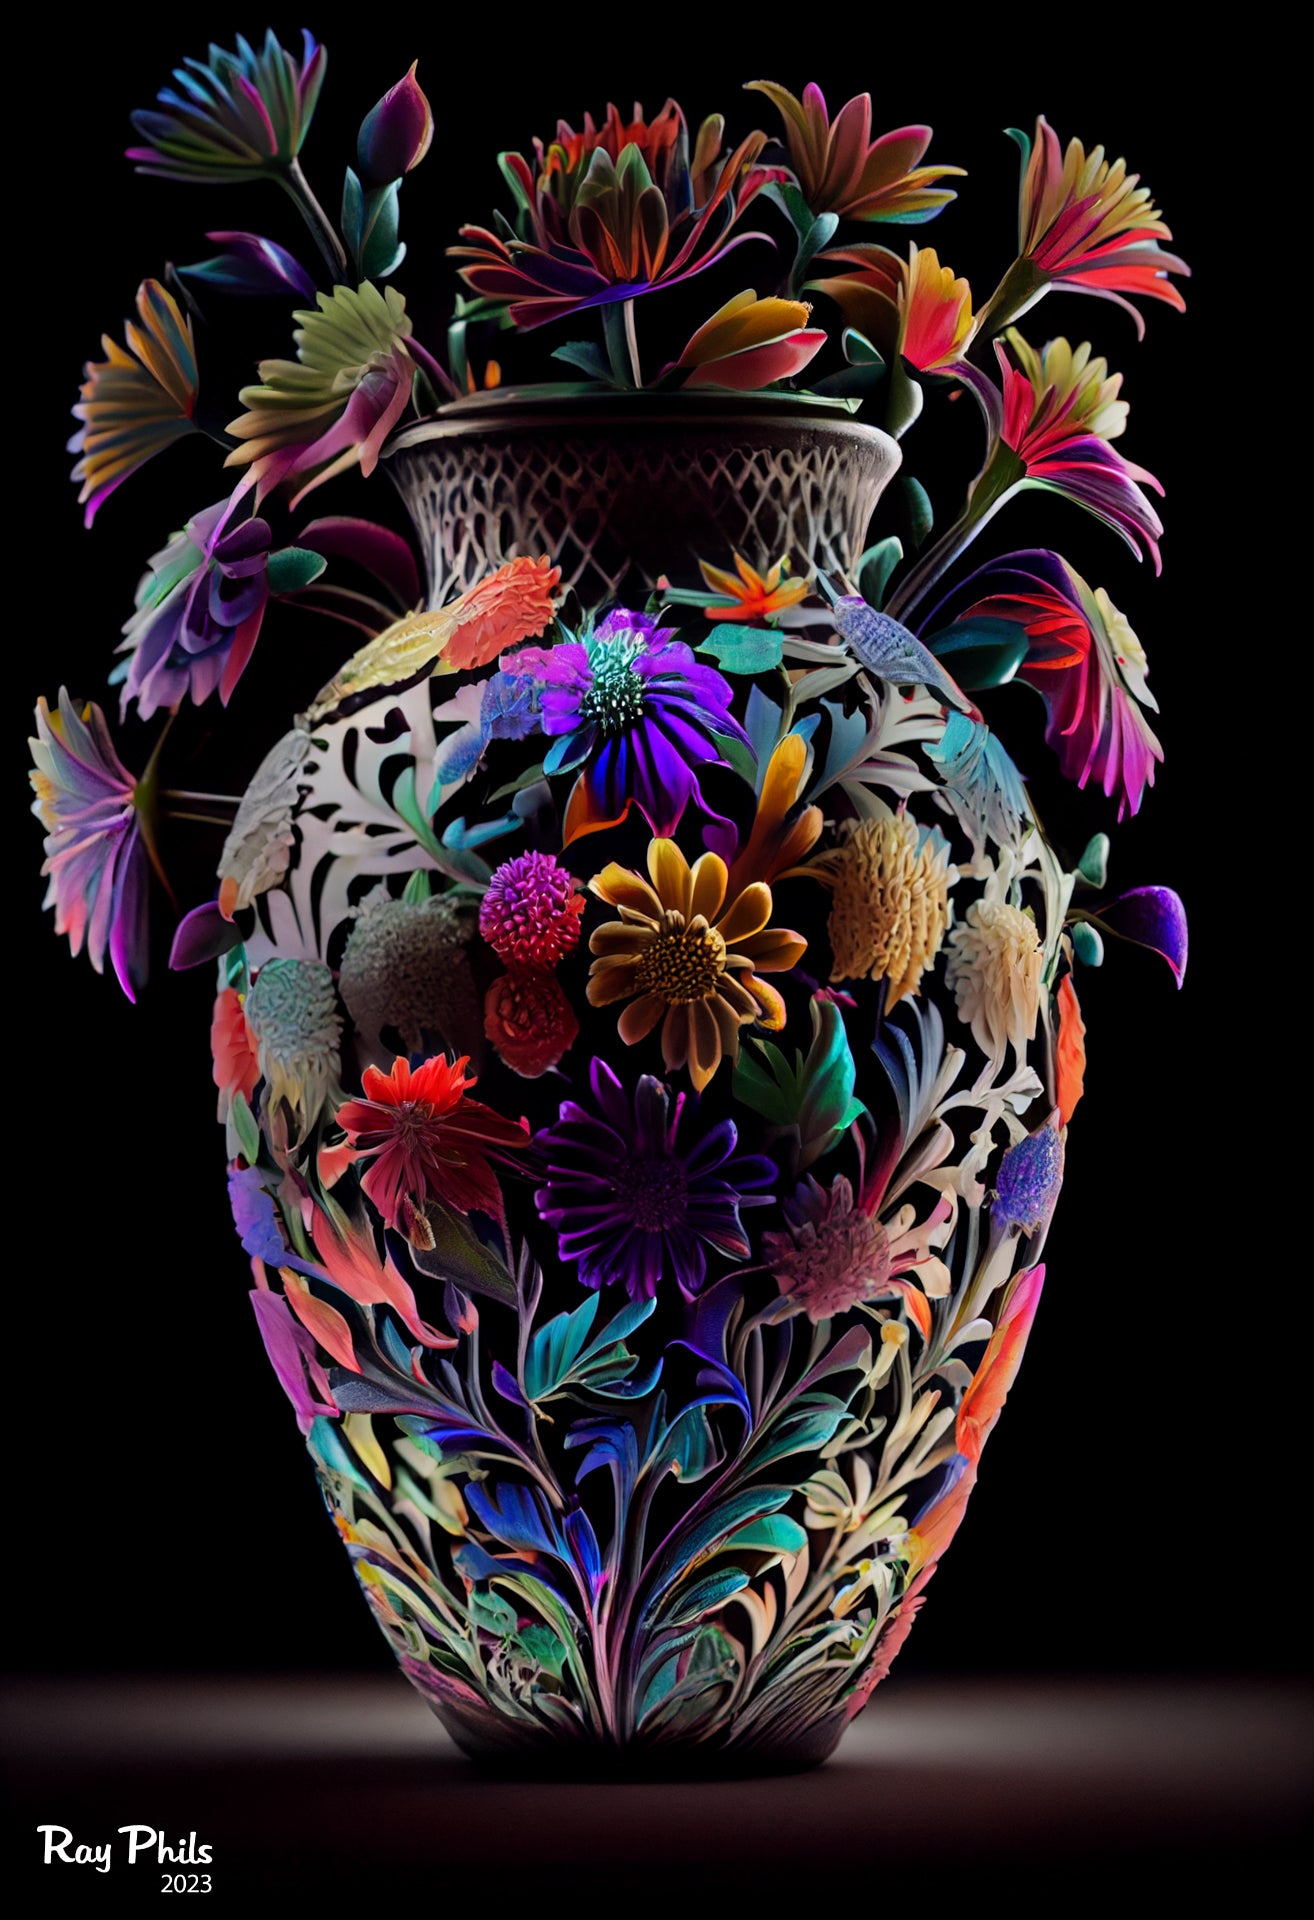 Colorful Flowers in a vase IV